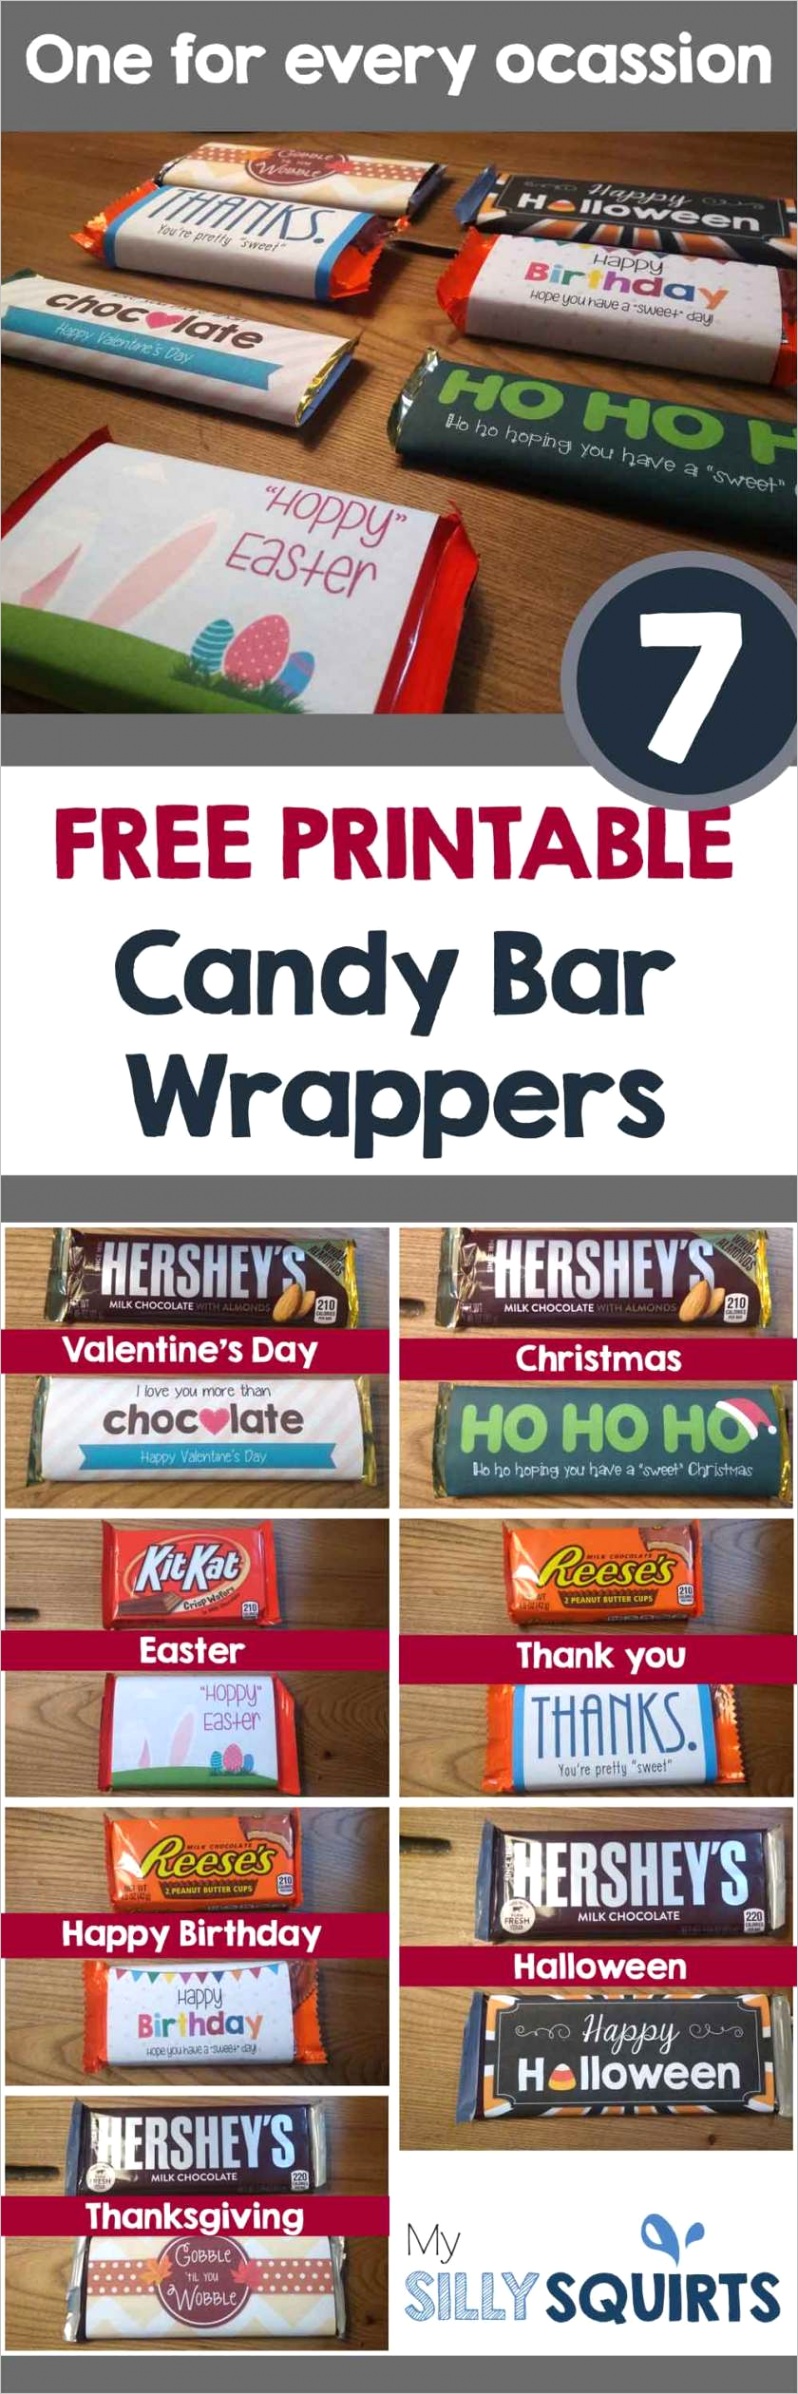 free candy bar wrappers every occasion